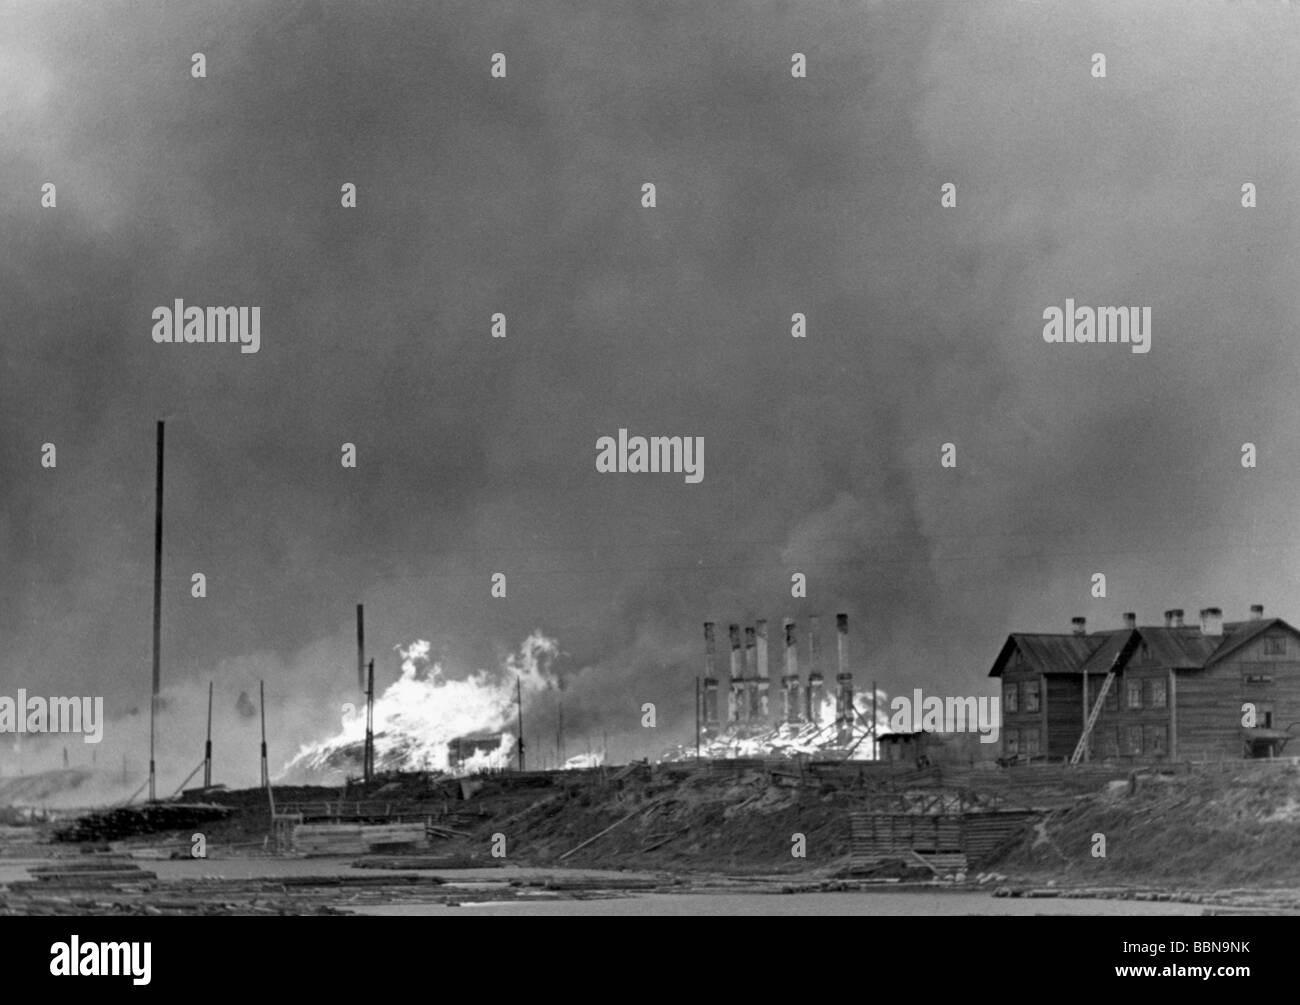 events, Second World War / WWII, Russia 1942 / 1943, Russian village, hit by artillery fire, circa 1943, burning, 20th century, historic, historical, destruction, Soviet Union, USSR, 1940s, Stock Photo